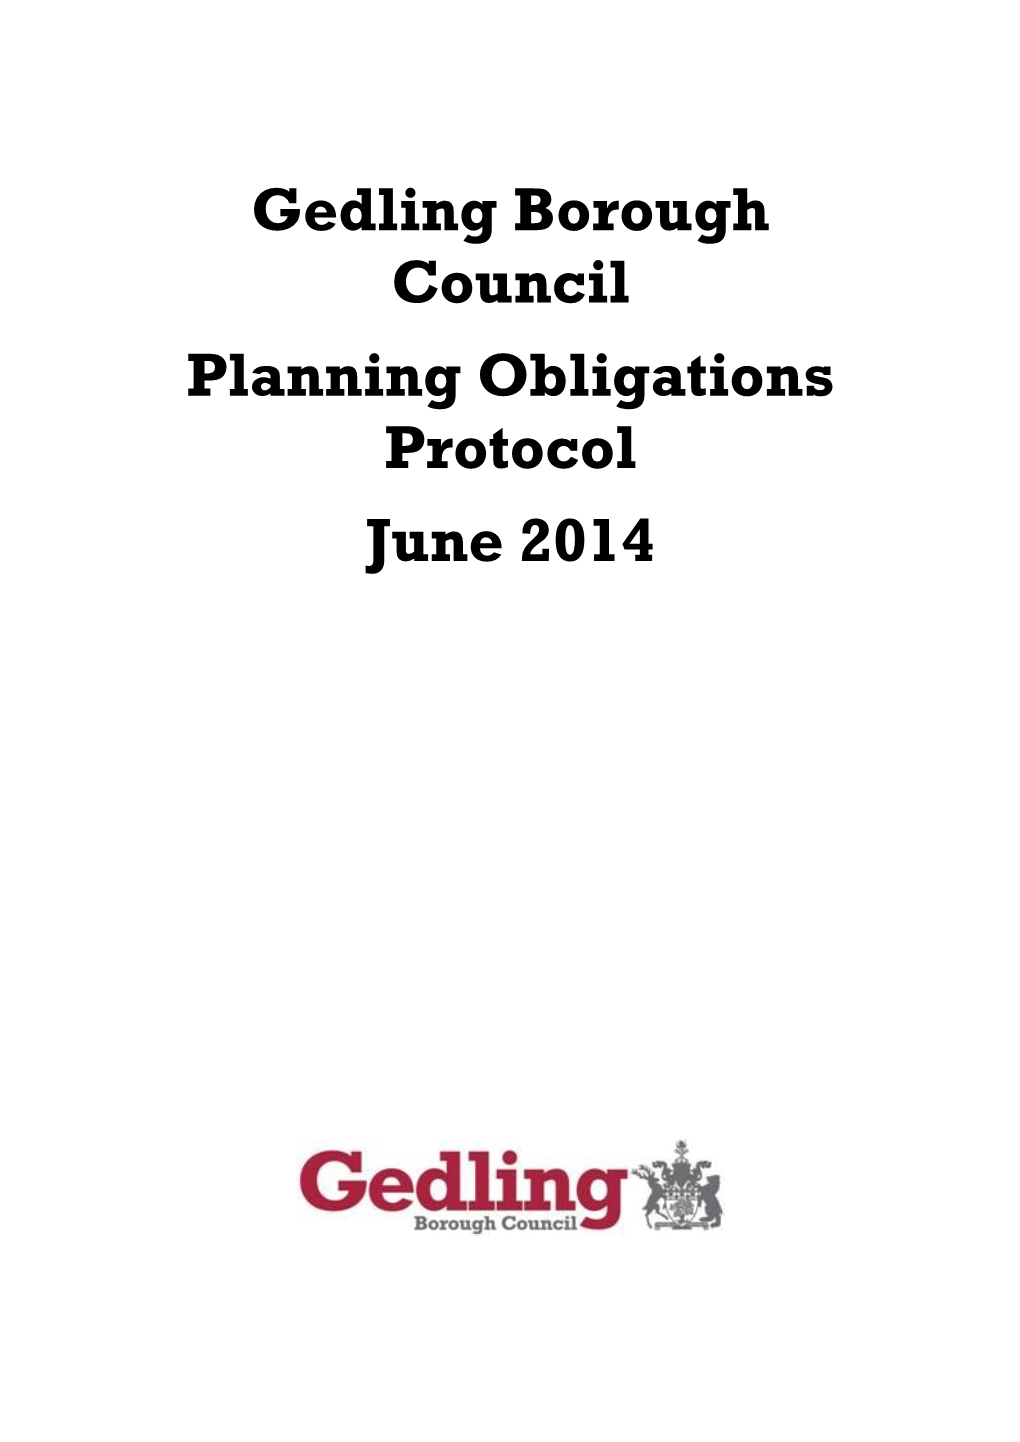 Gedling Borough Council Planning Obligations Protocol June 2014